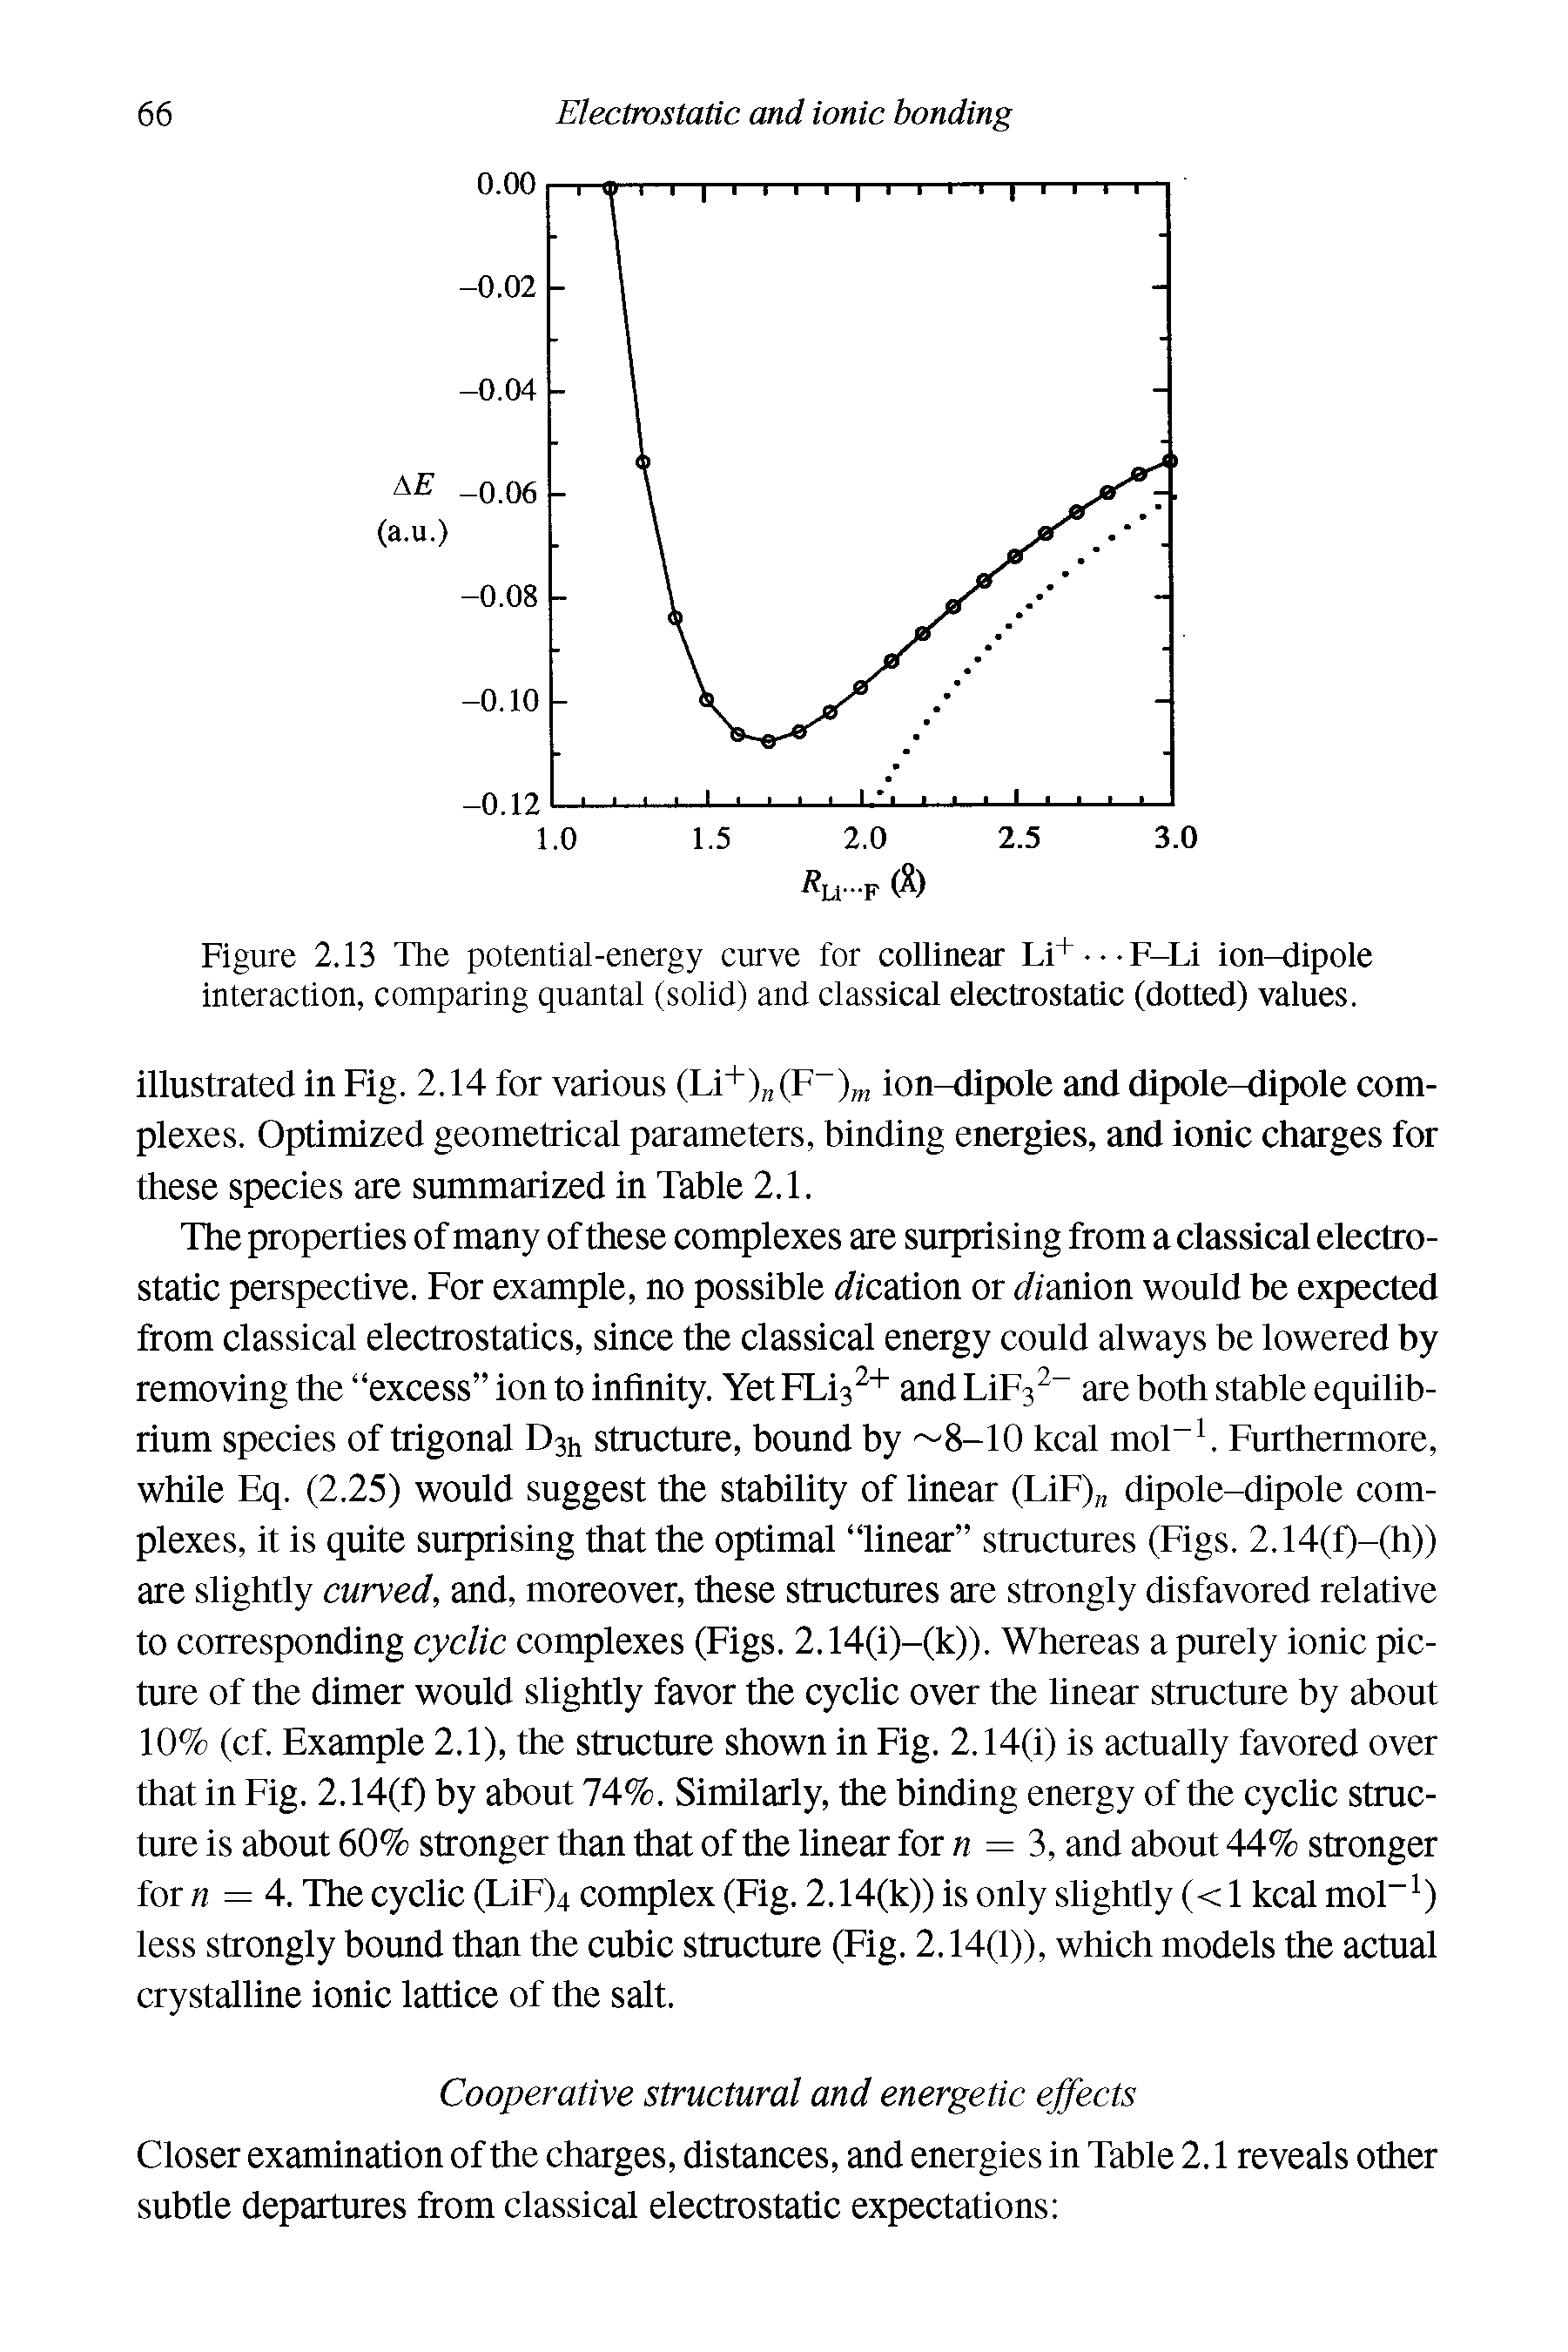 Figure 2.13 The potential-energy curve for collinear Li+-F-Li ion-dipole interaction, comparing quantal (solid) and classical electrostatic (dotted) values.